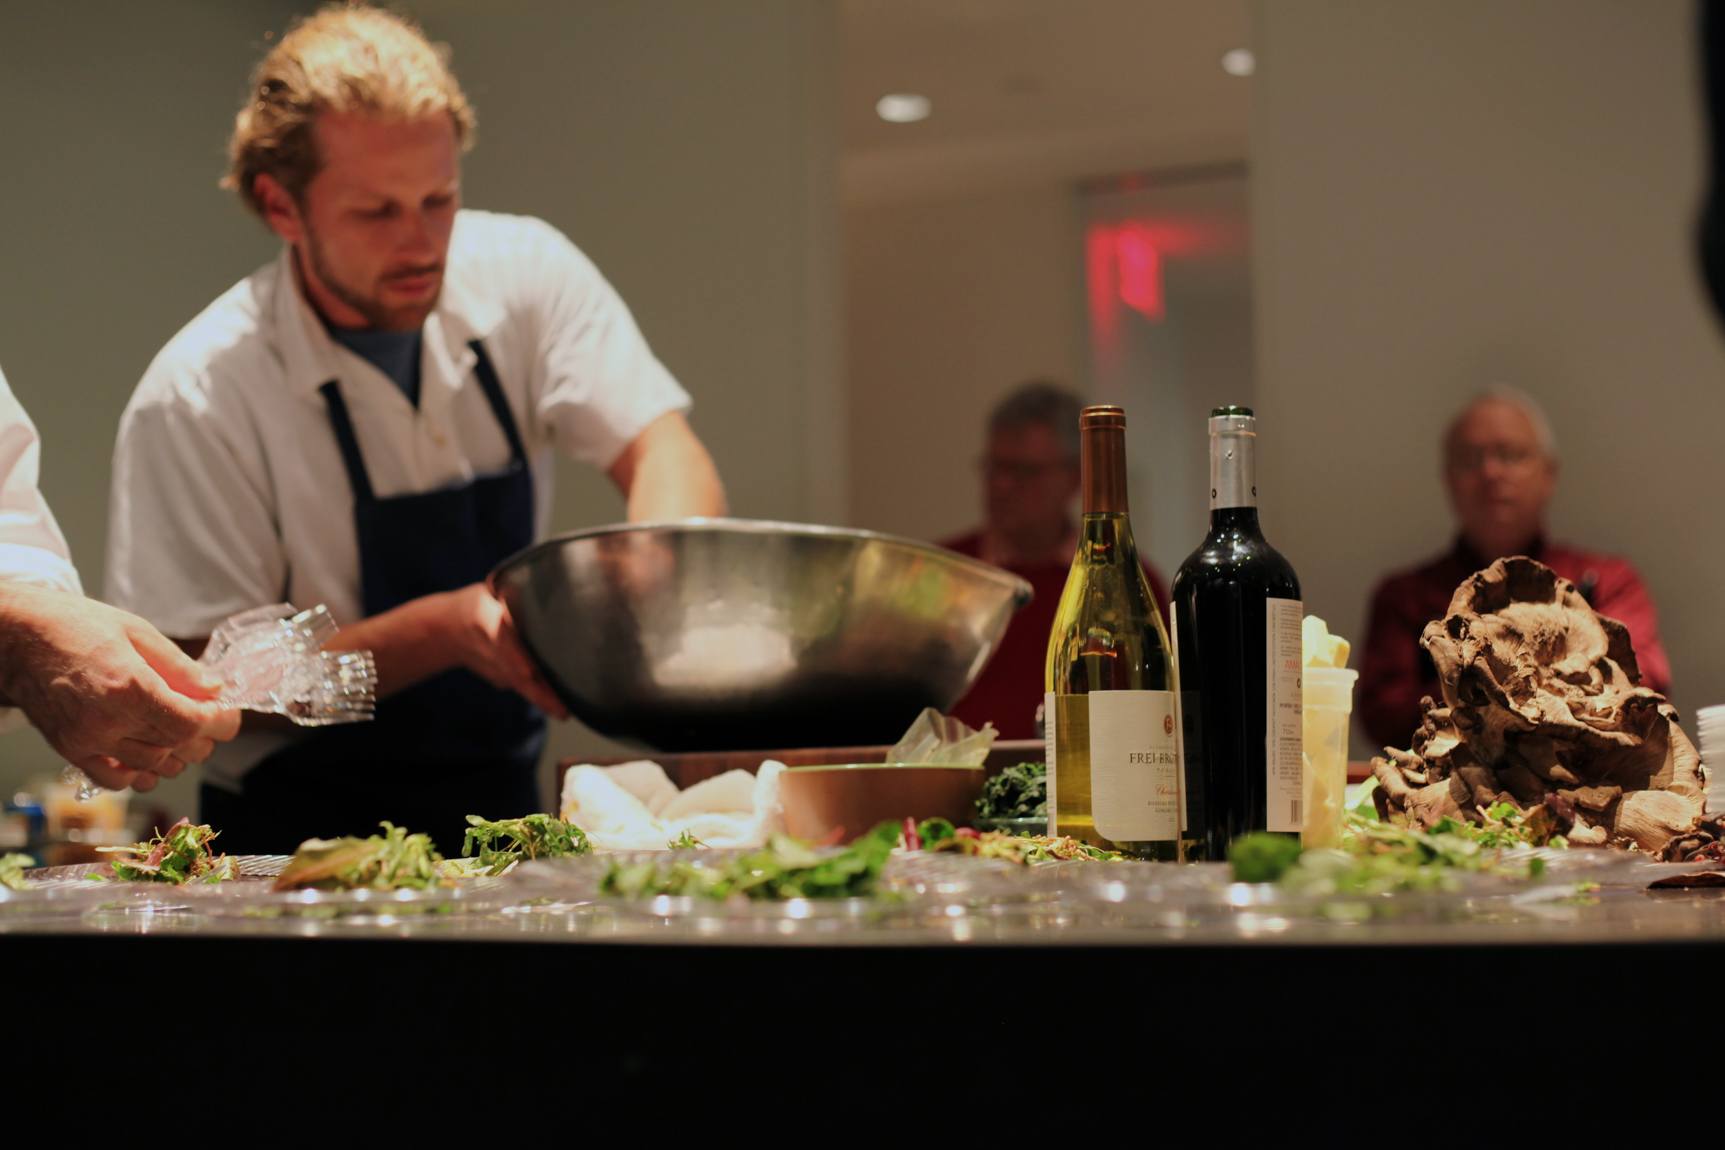 A closeup shot of a chef's table holding salads and wine.